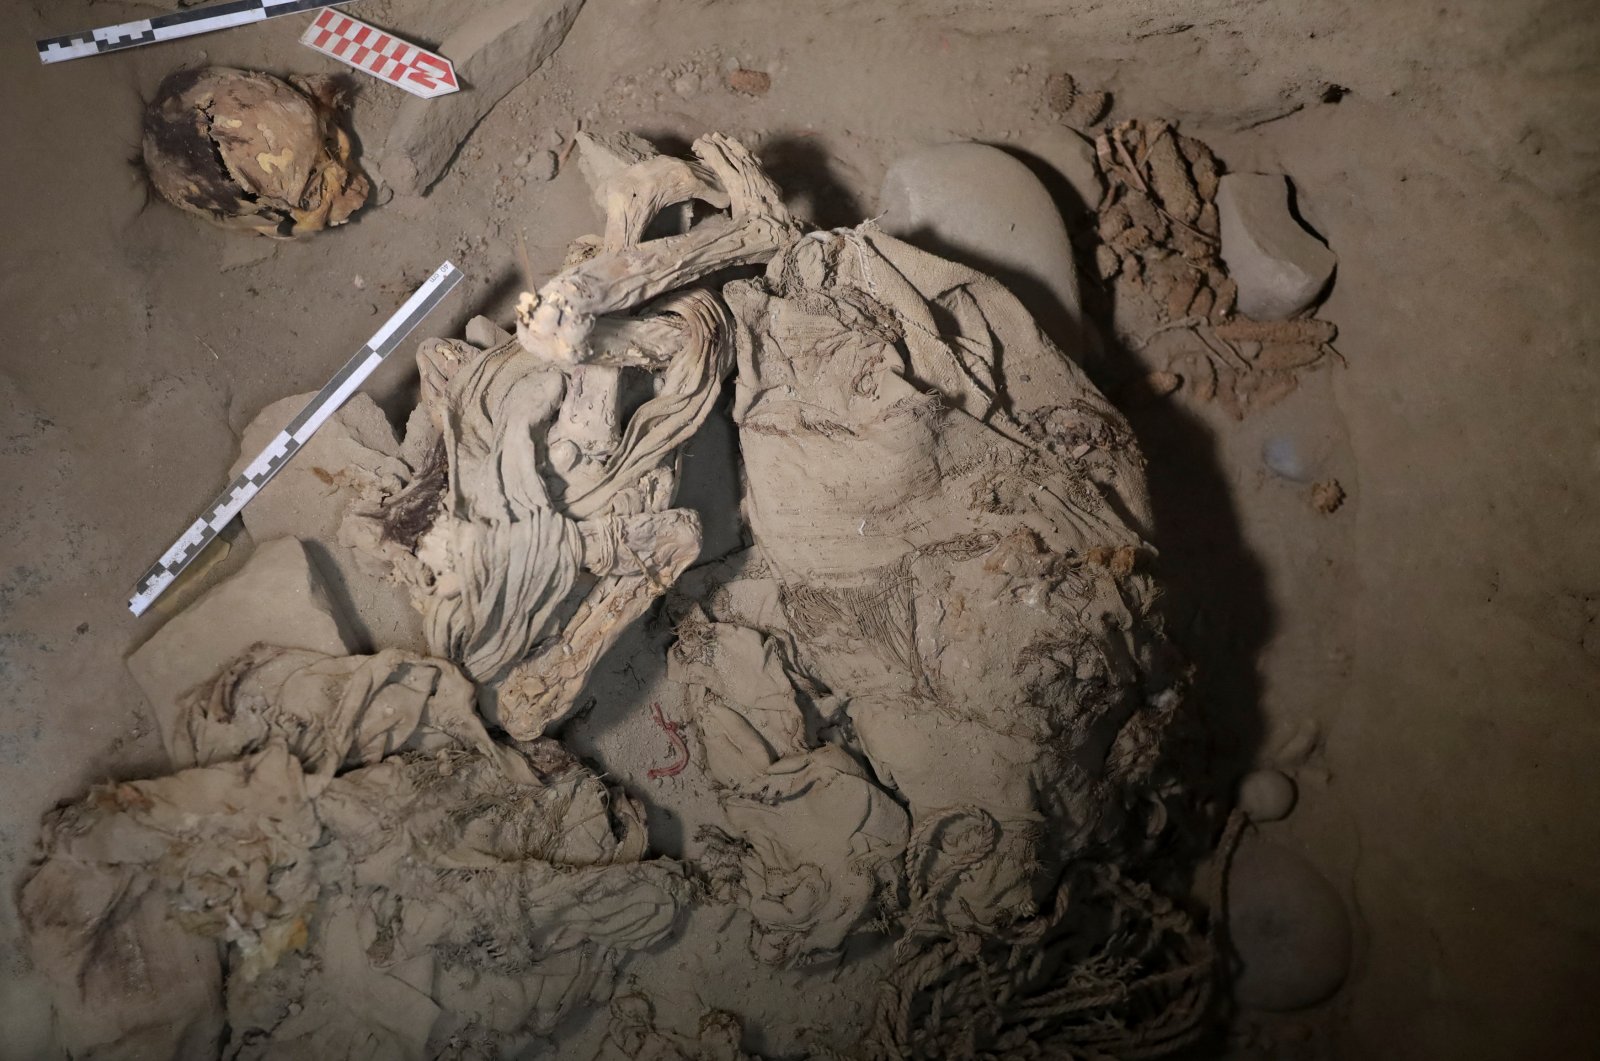 Skeletal remains and parts of the funerary bundle of a mummy found by Peruvian archaeologists are seen in the ruins of Cajarmarquilla, in the outskirts of Lima, Peru, April 24, 2023. (Reuters Photo)